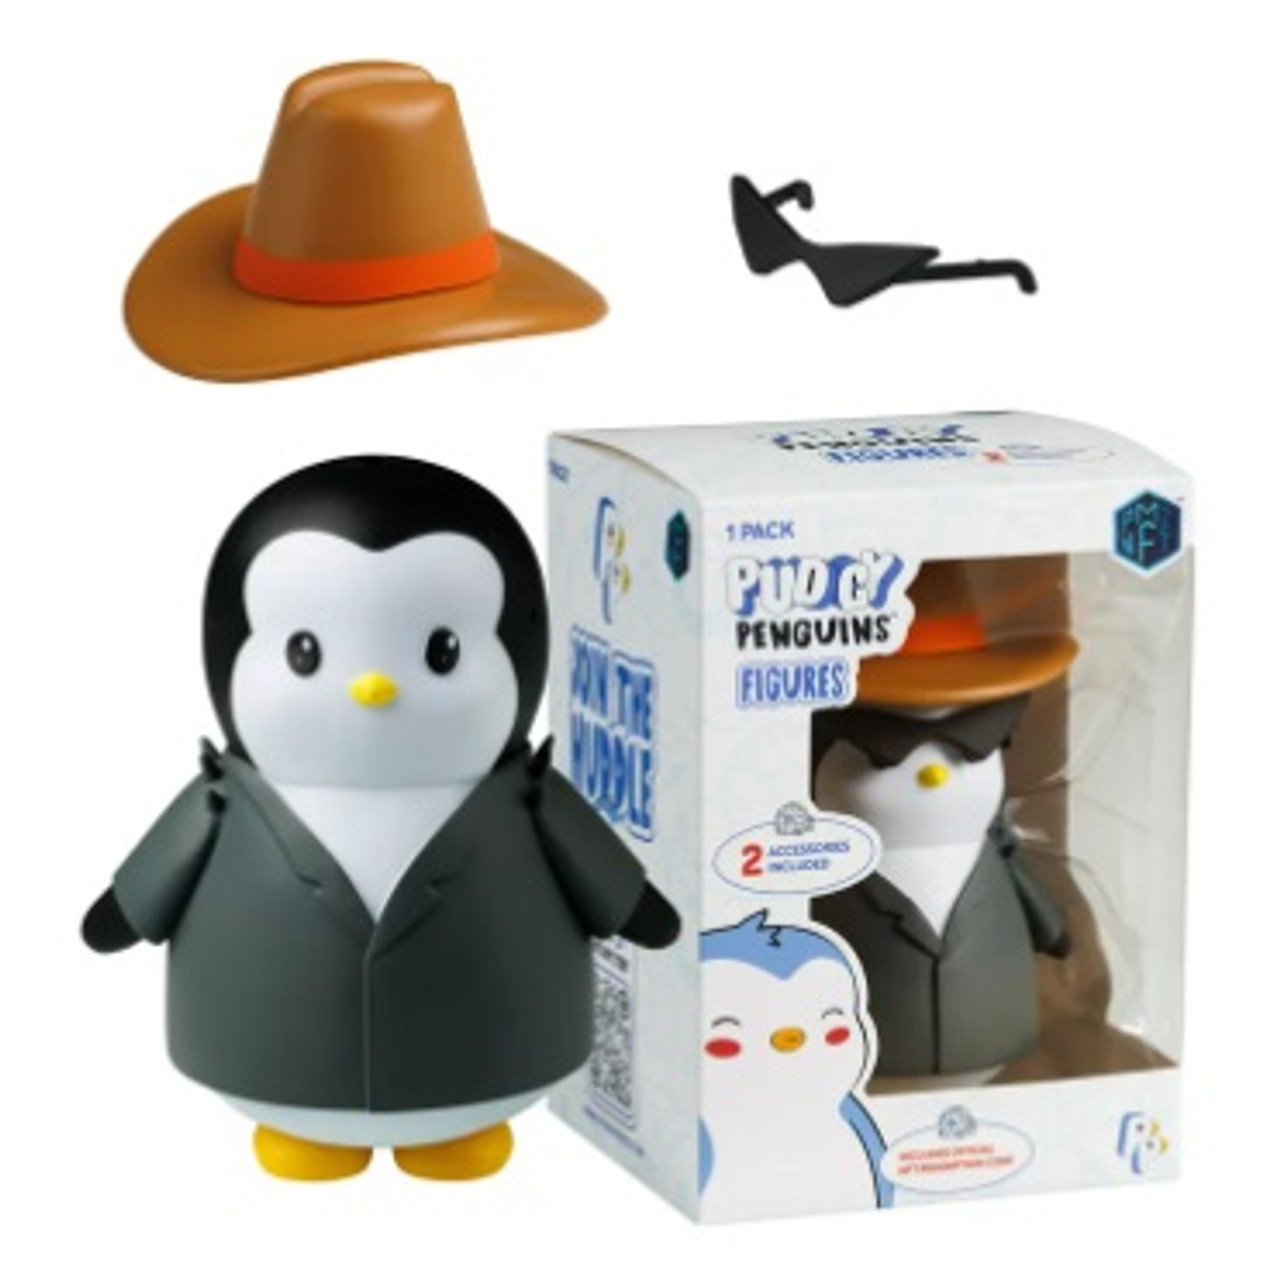 PUDGY PENGUINS NFT FIGURES 5 INCHES